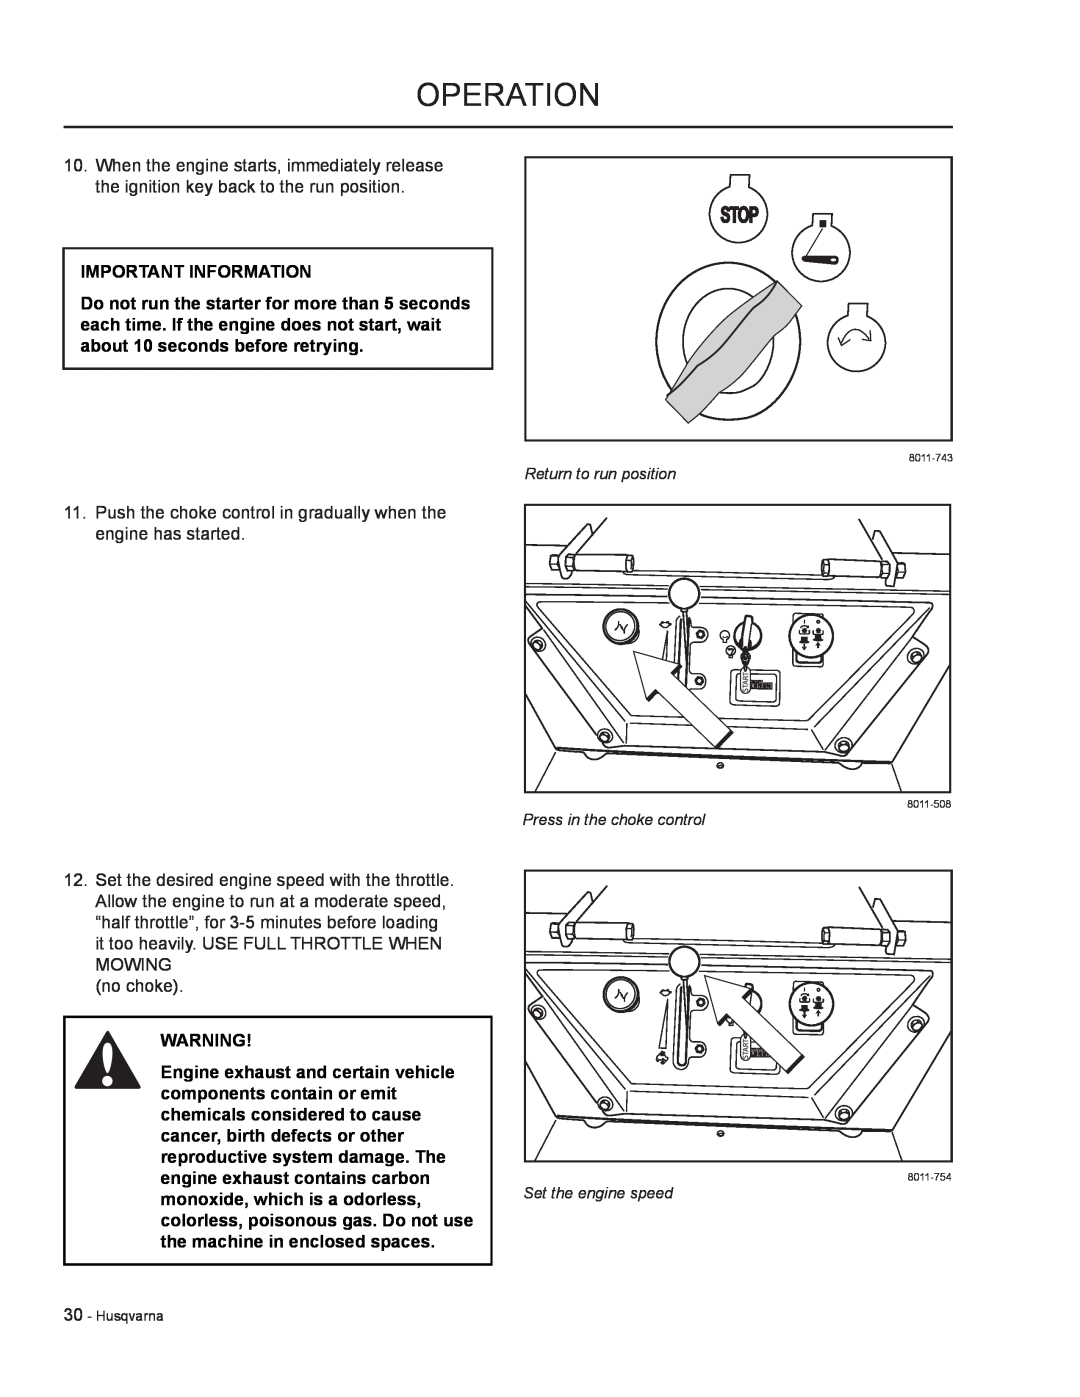 HTC LZC5227 / 965879701 Operation, Important Information, Push the choke control in gradually when the engine has started 